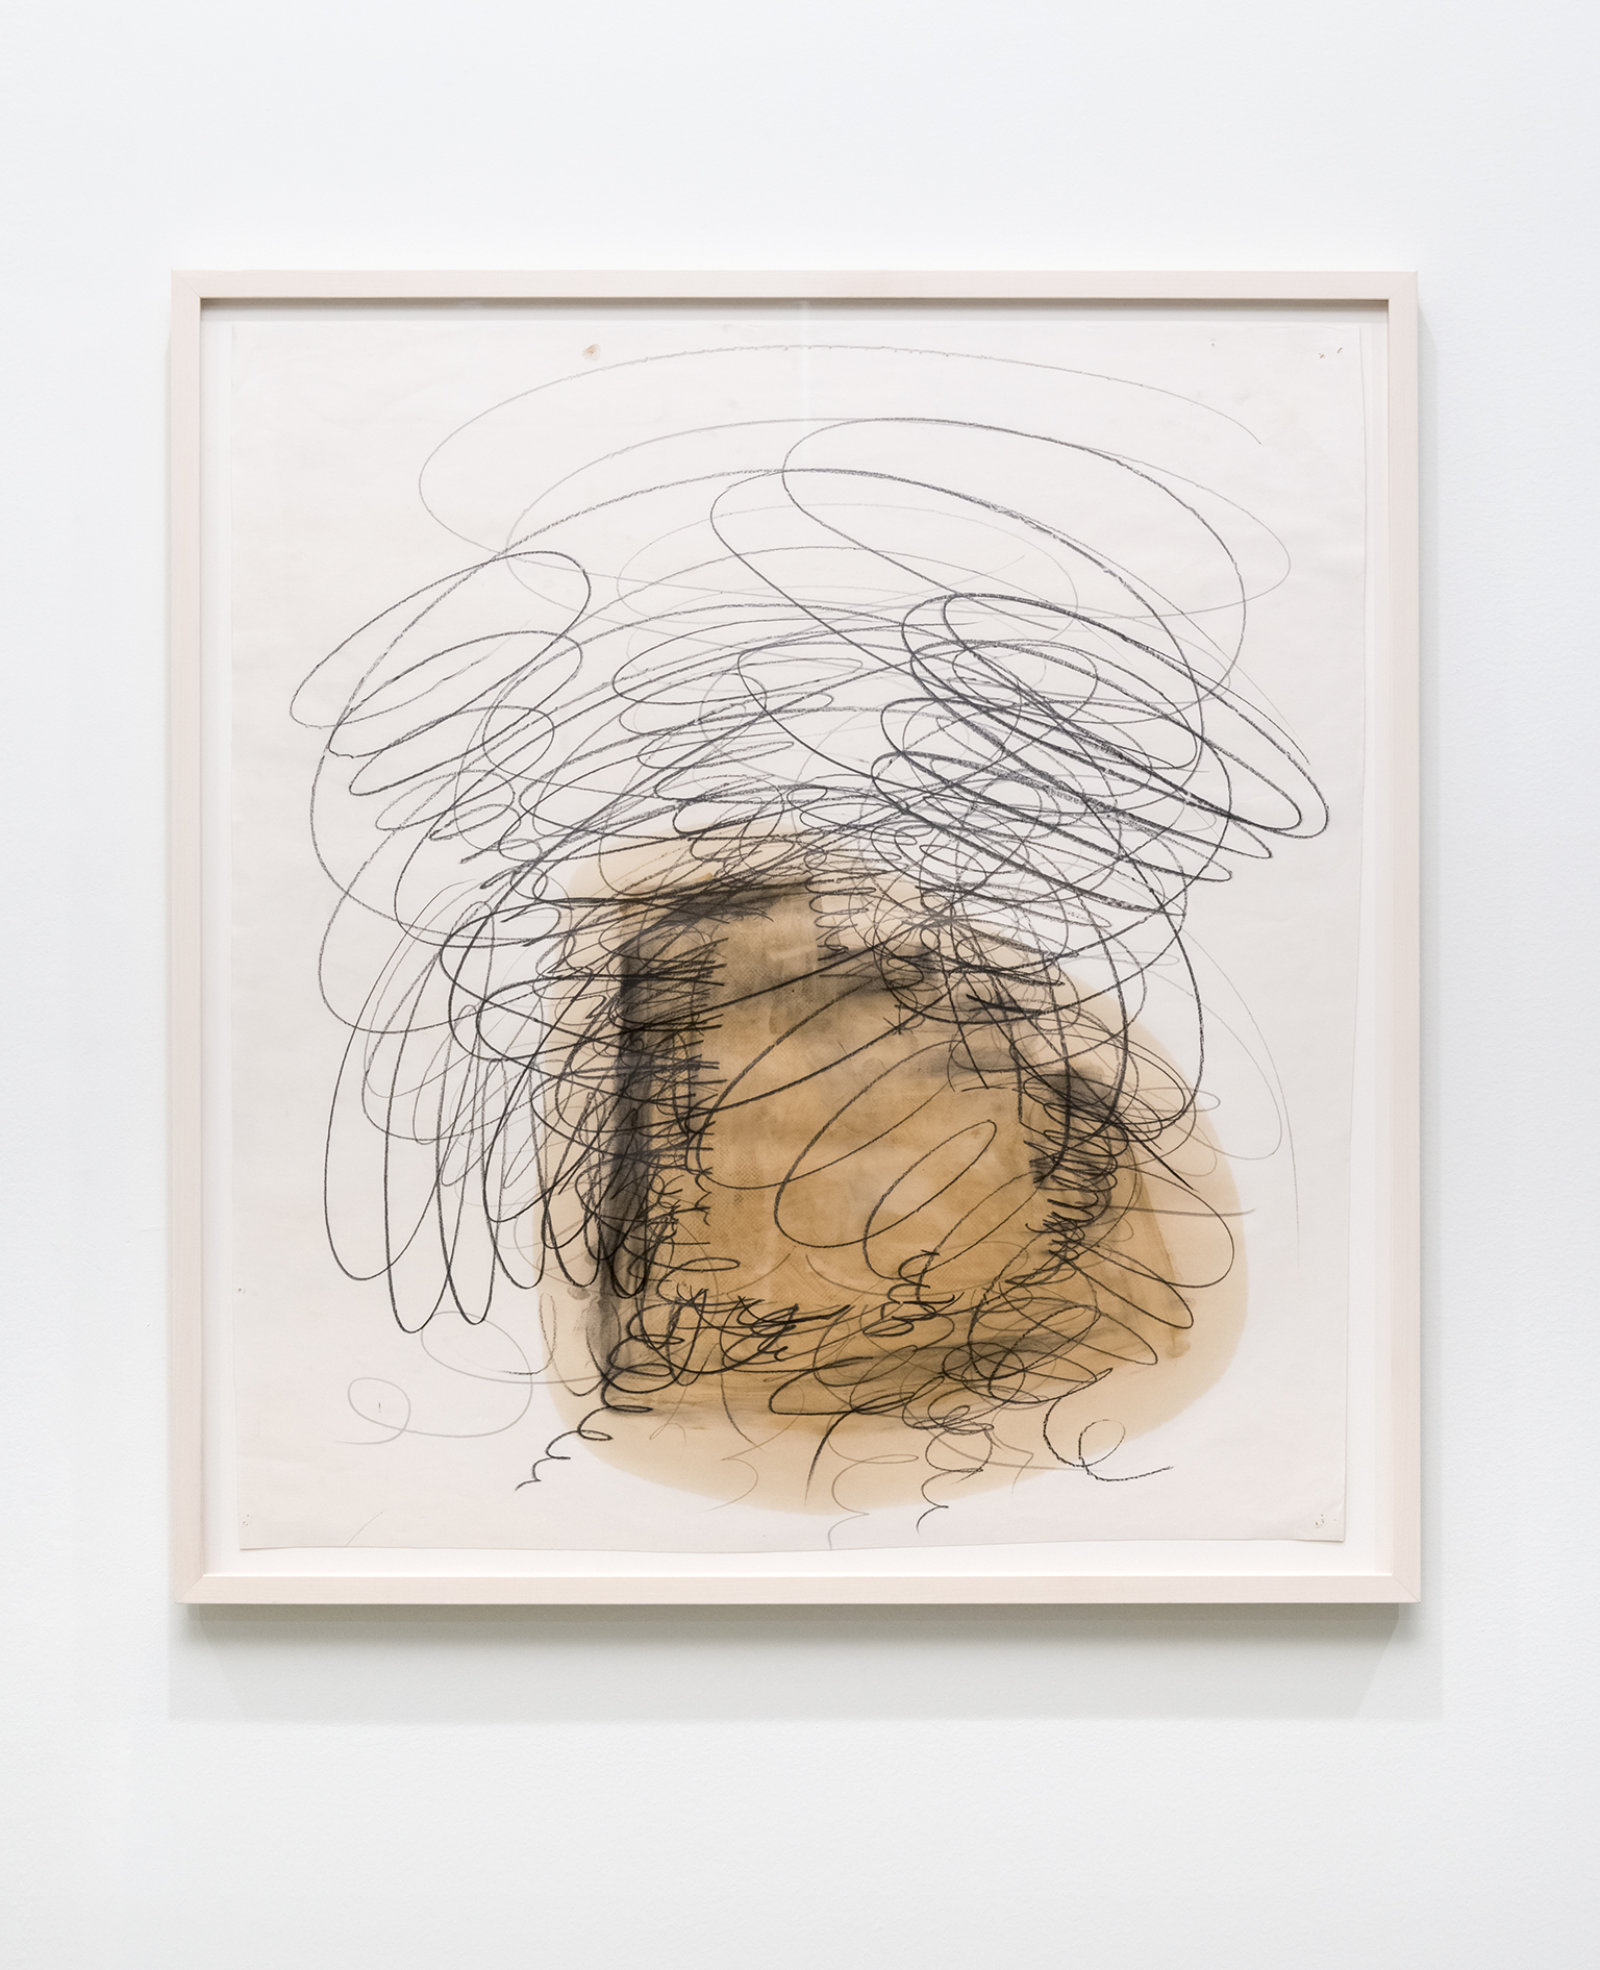 Jerry Pethick, Kuhn Shape II Vortex Studies Cable St., 1990, graphite, butter on paper, dimensions variable